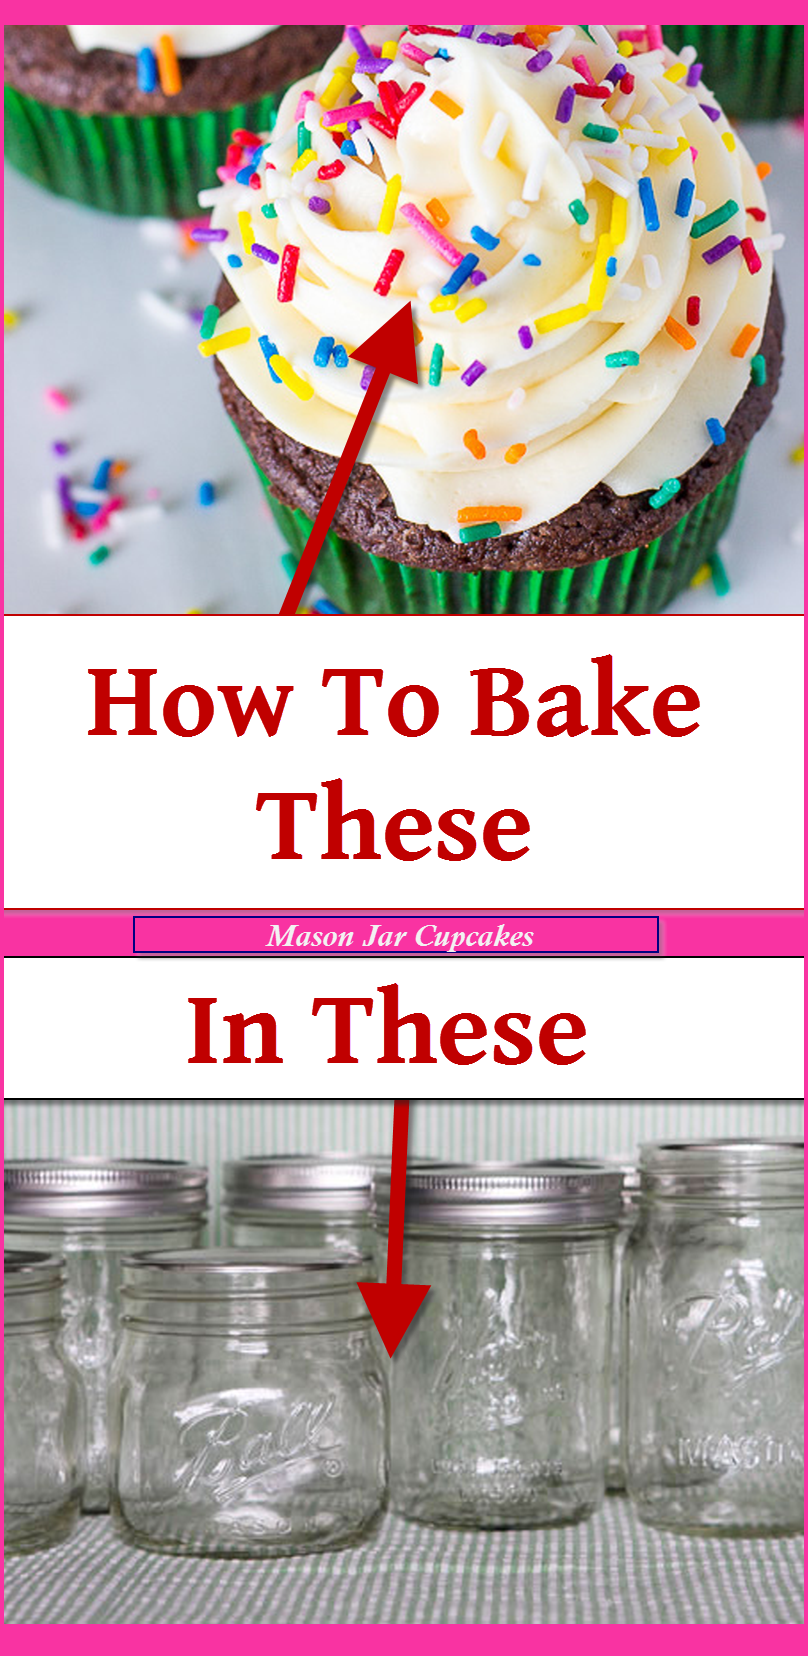 How To Bake Cupcakes in a Jar - Mason Jar Cupcakes DIY Instructions and recipes.  Great idea for baby showers, birthdays, or to give as homemade gifts.